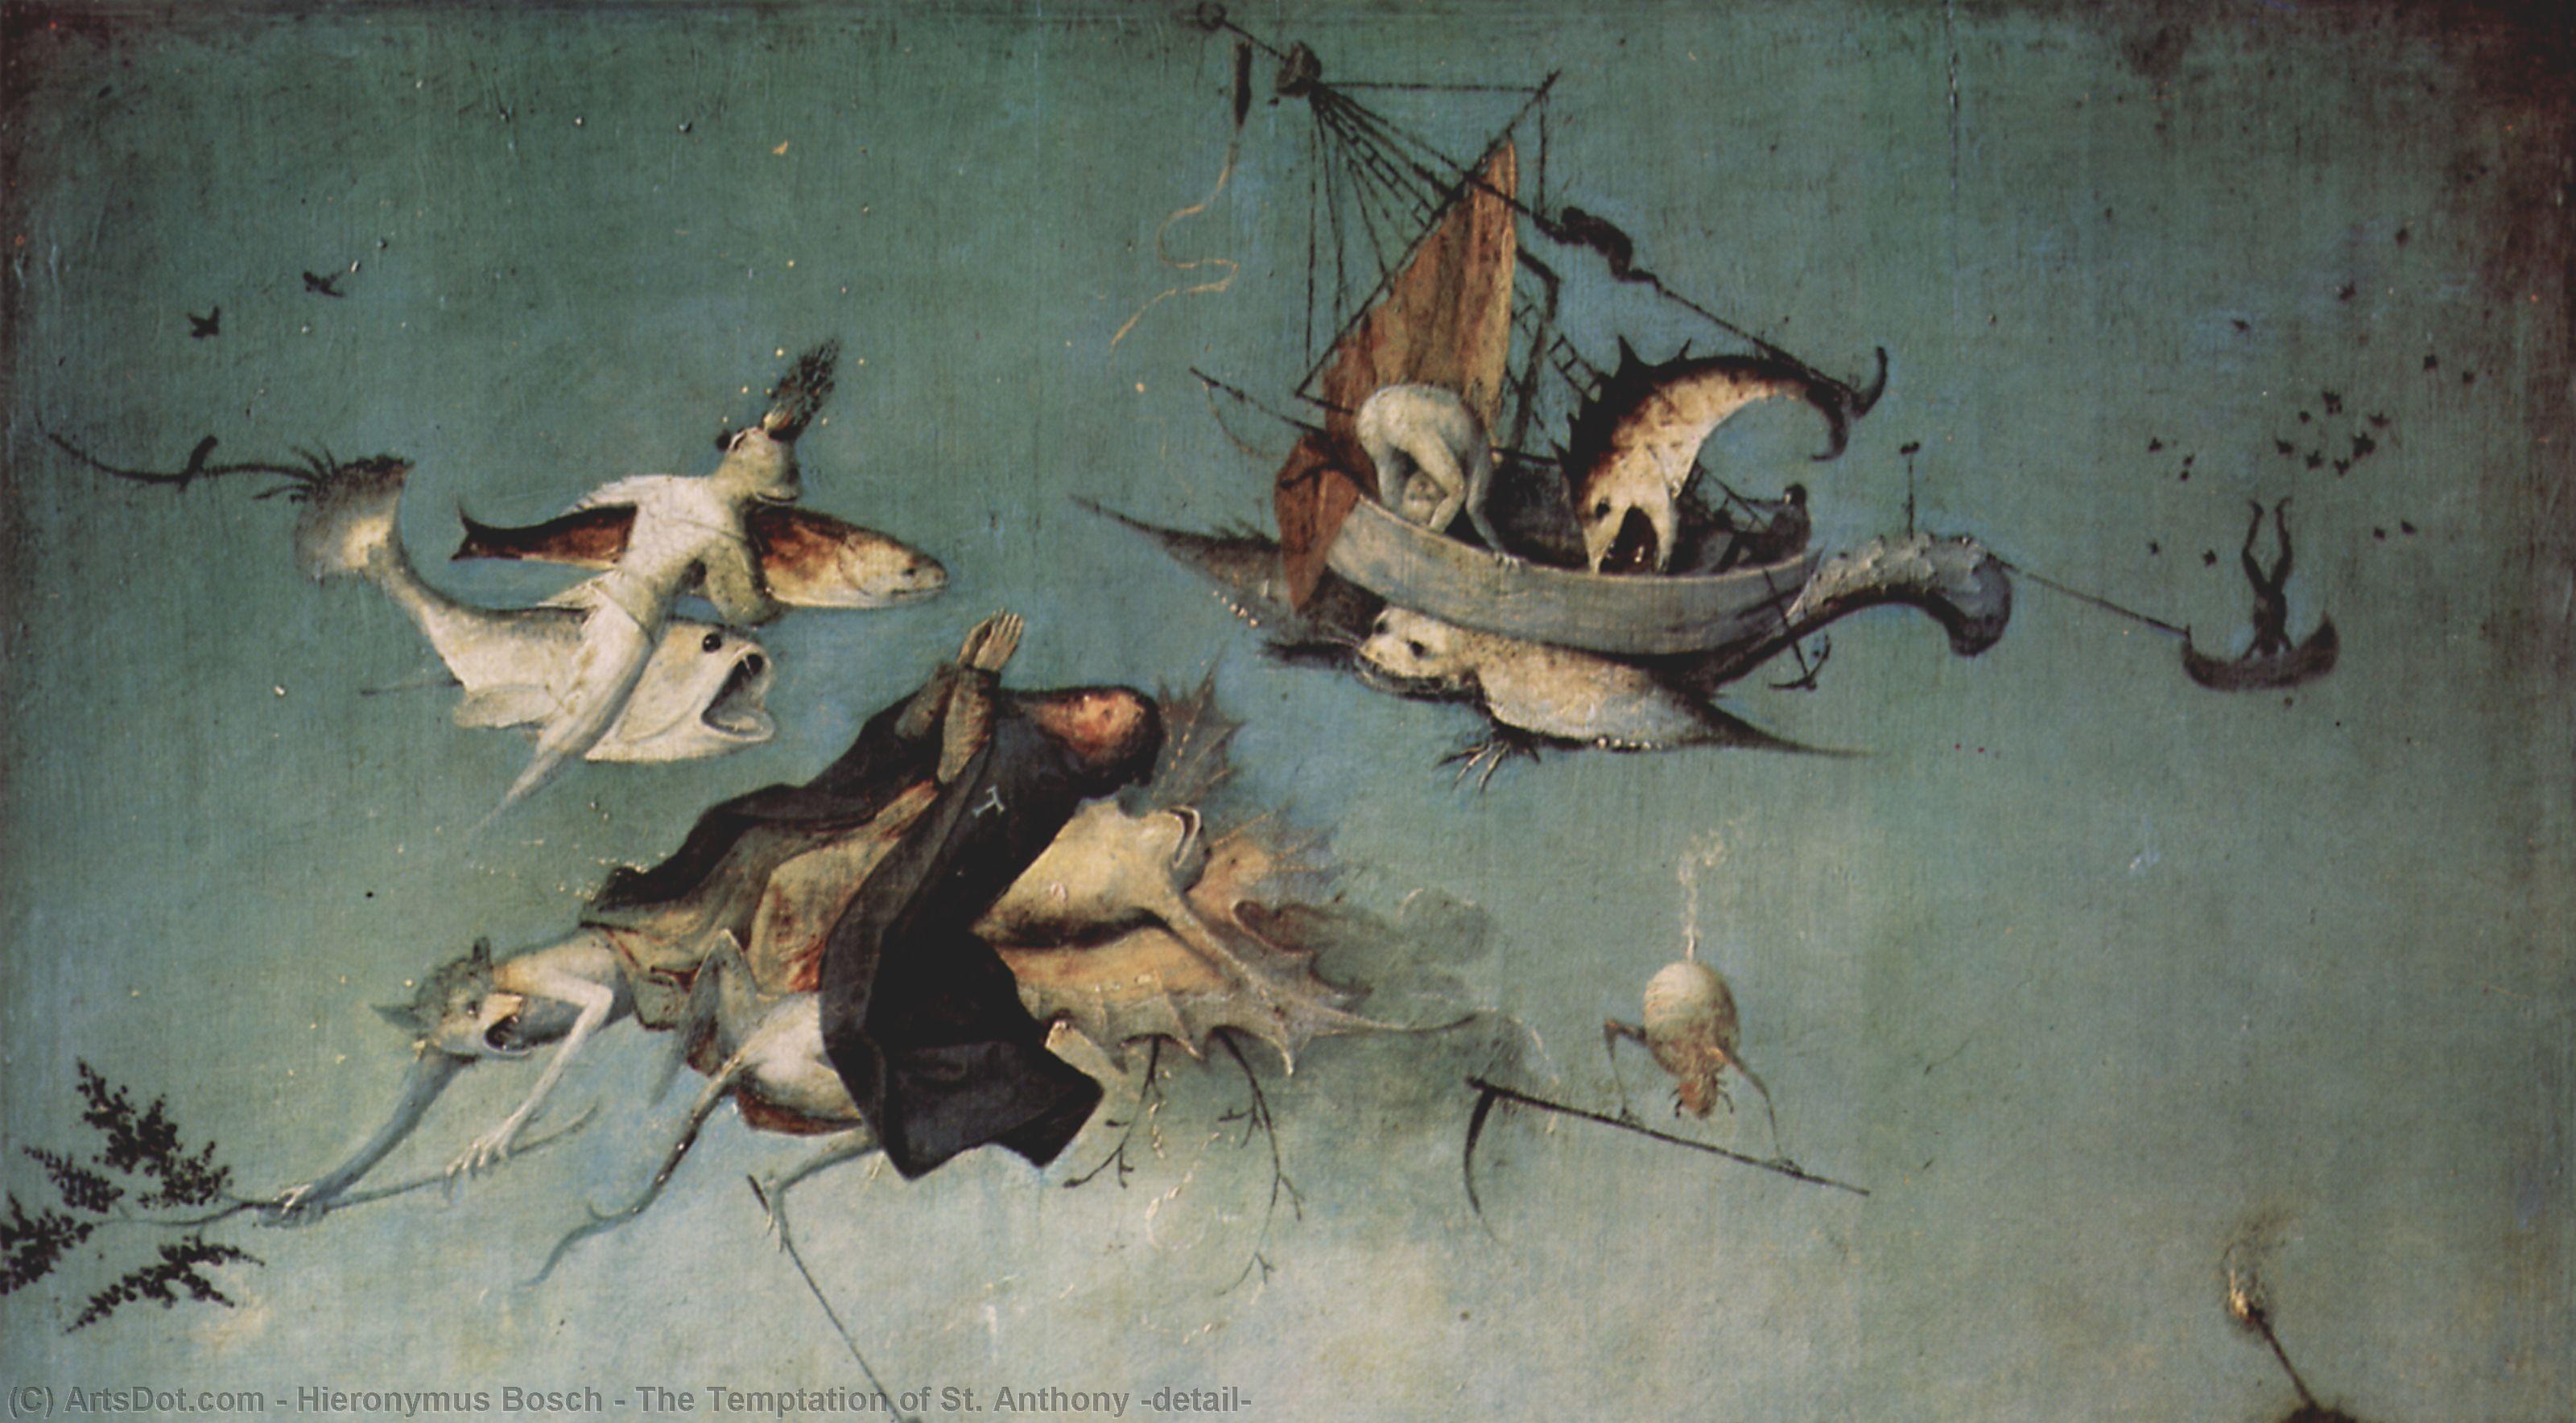 WikiOO.org - 백과 사전 - 회화, 삽화 Hieronymus Bosch - The Temptation of St. Anthony (detail)